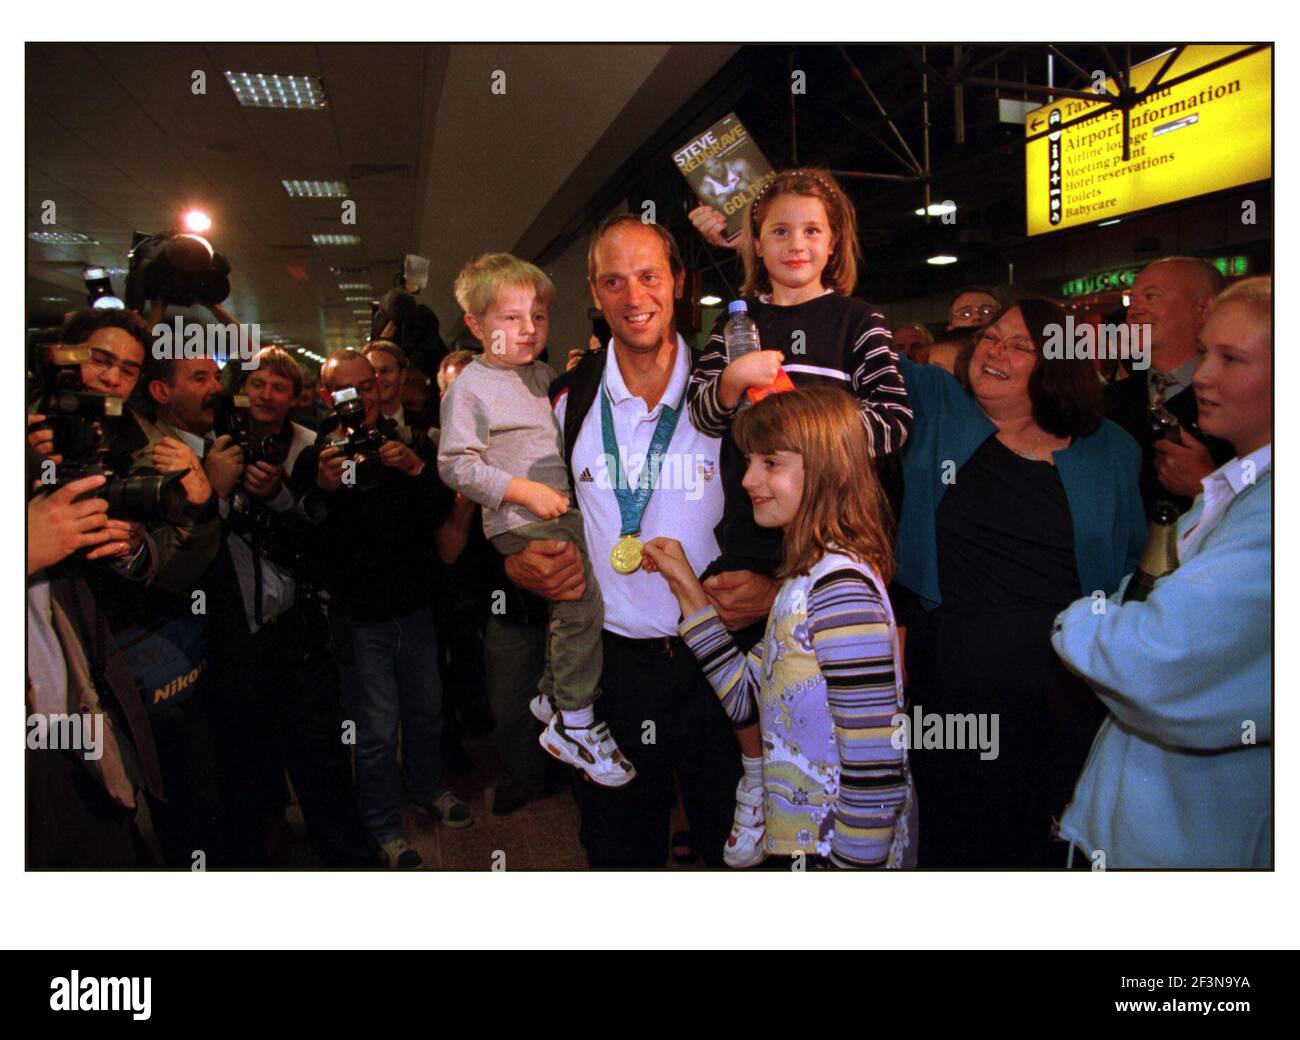 British Olympic Medalists arrive home at Heathrow airport....Steve Redgrave Coxless Four Rowing with family Stock Photo